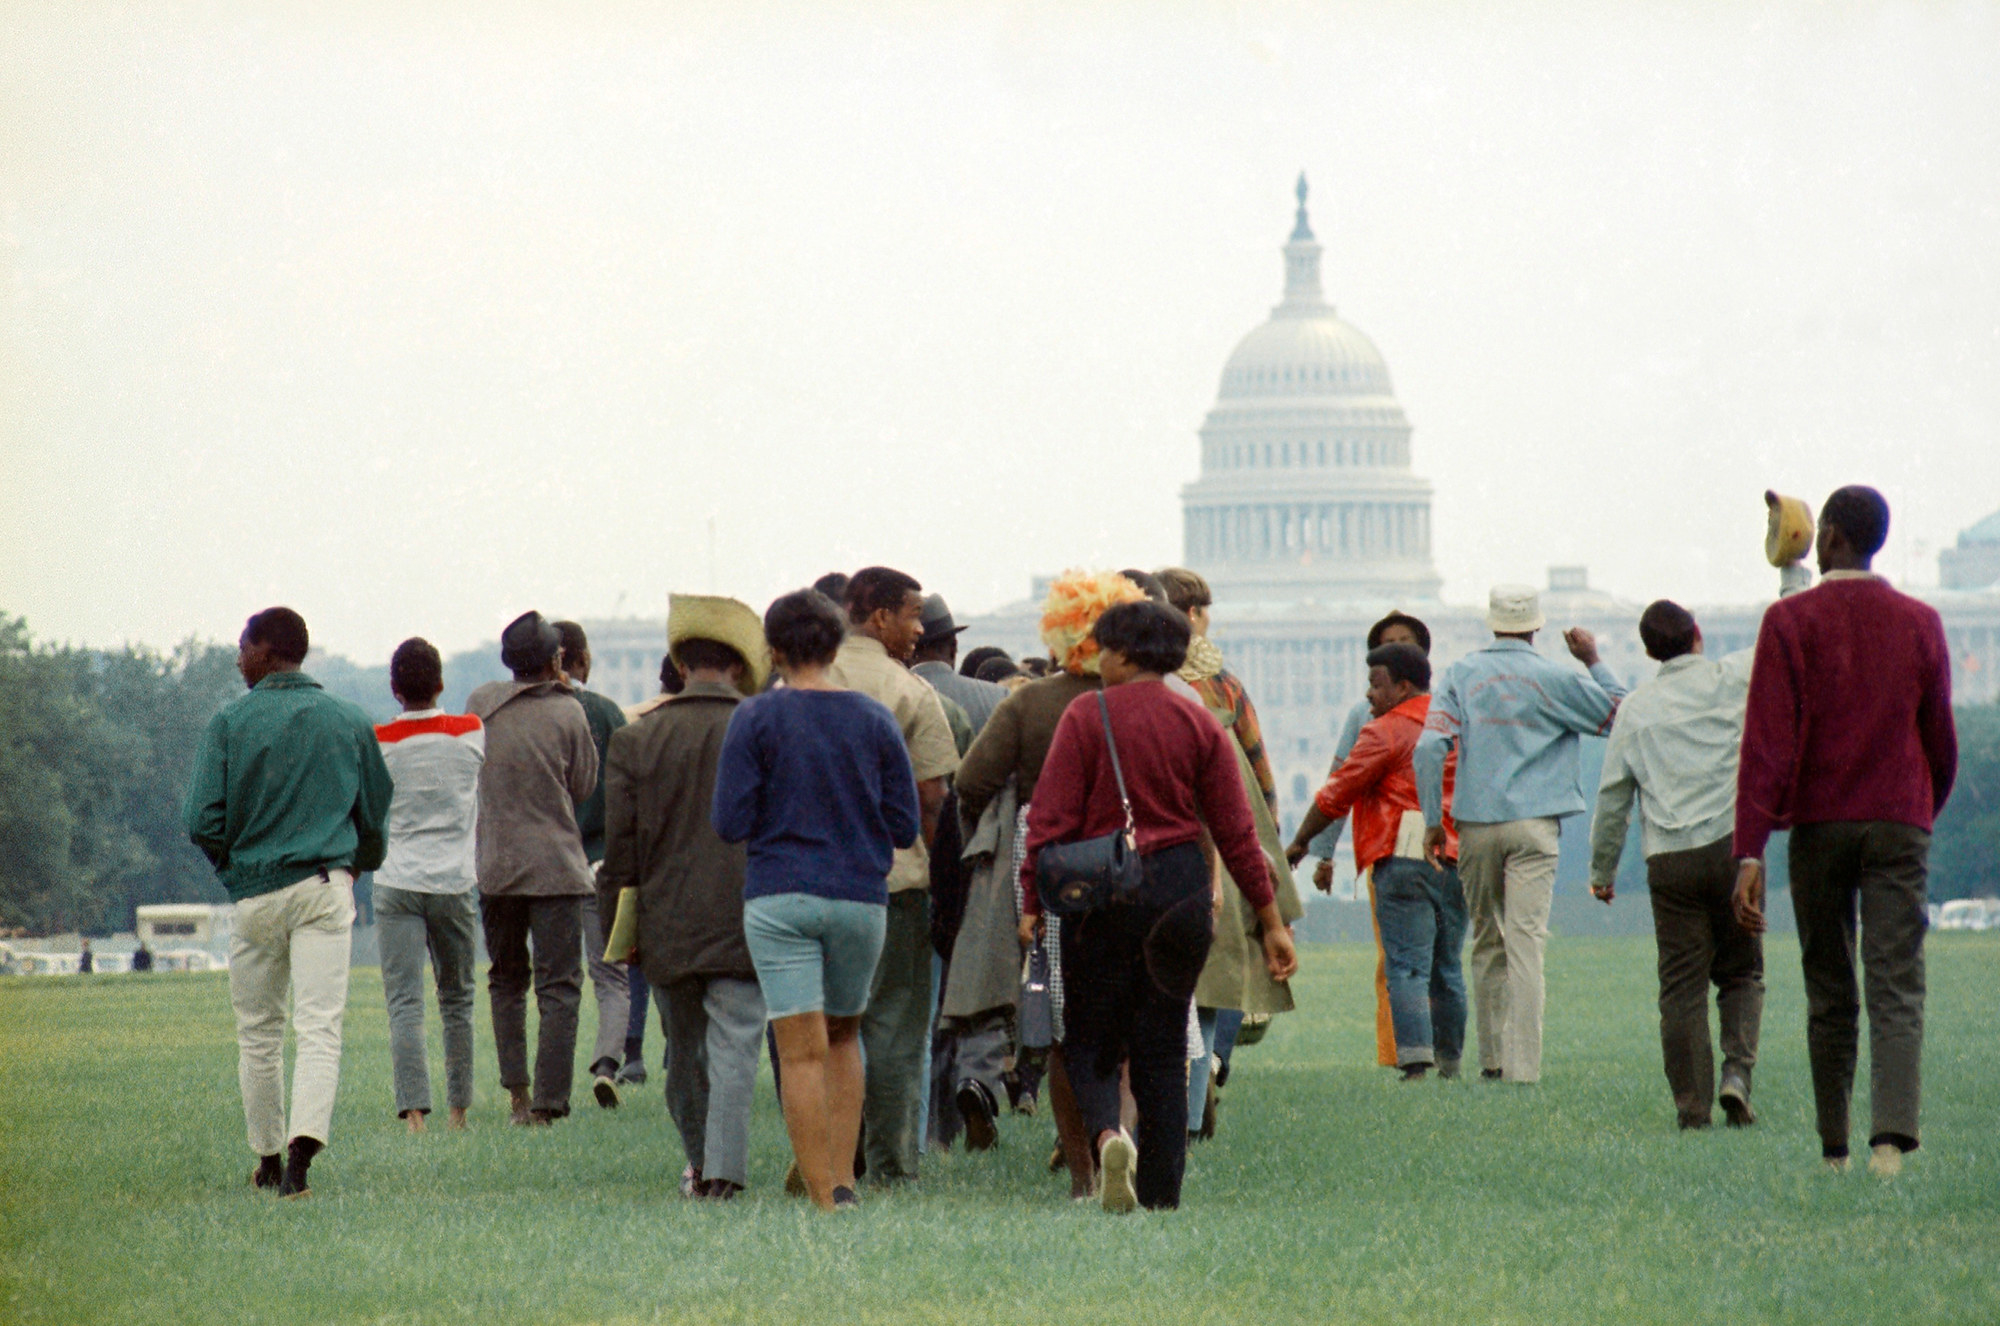 Attendees walk towards the US Capitol as part of the March on Washington.